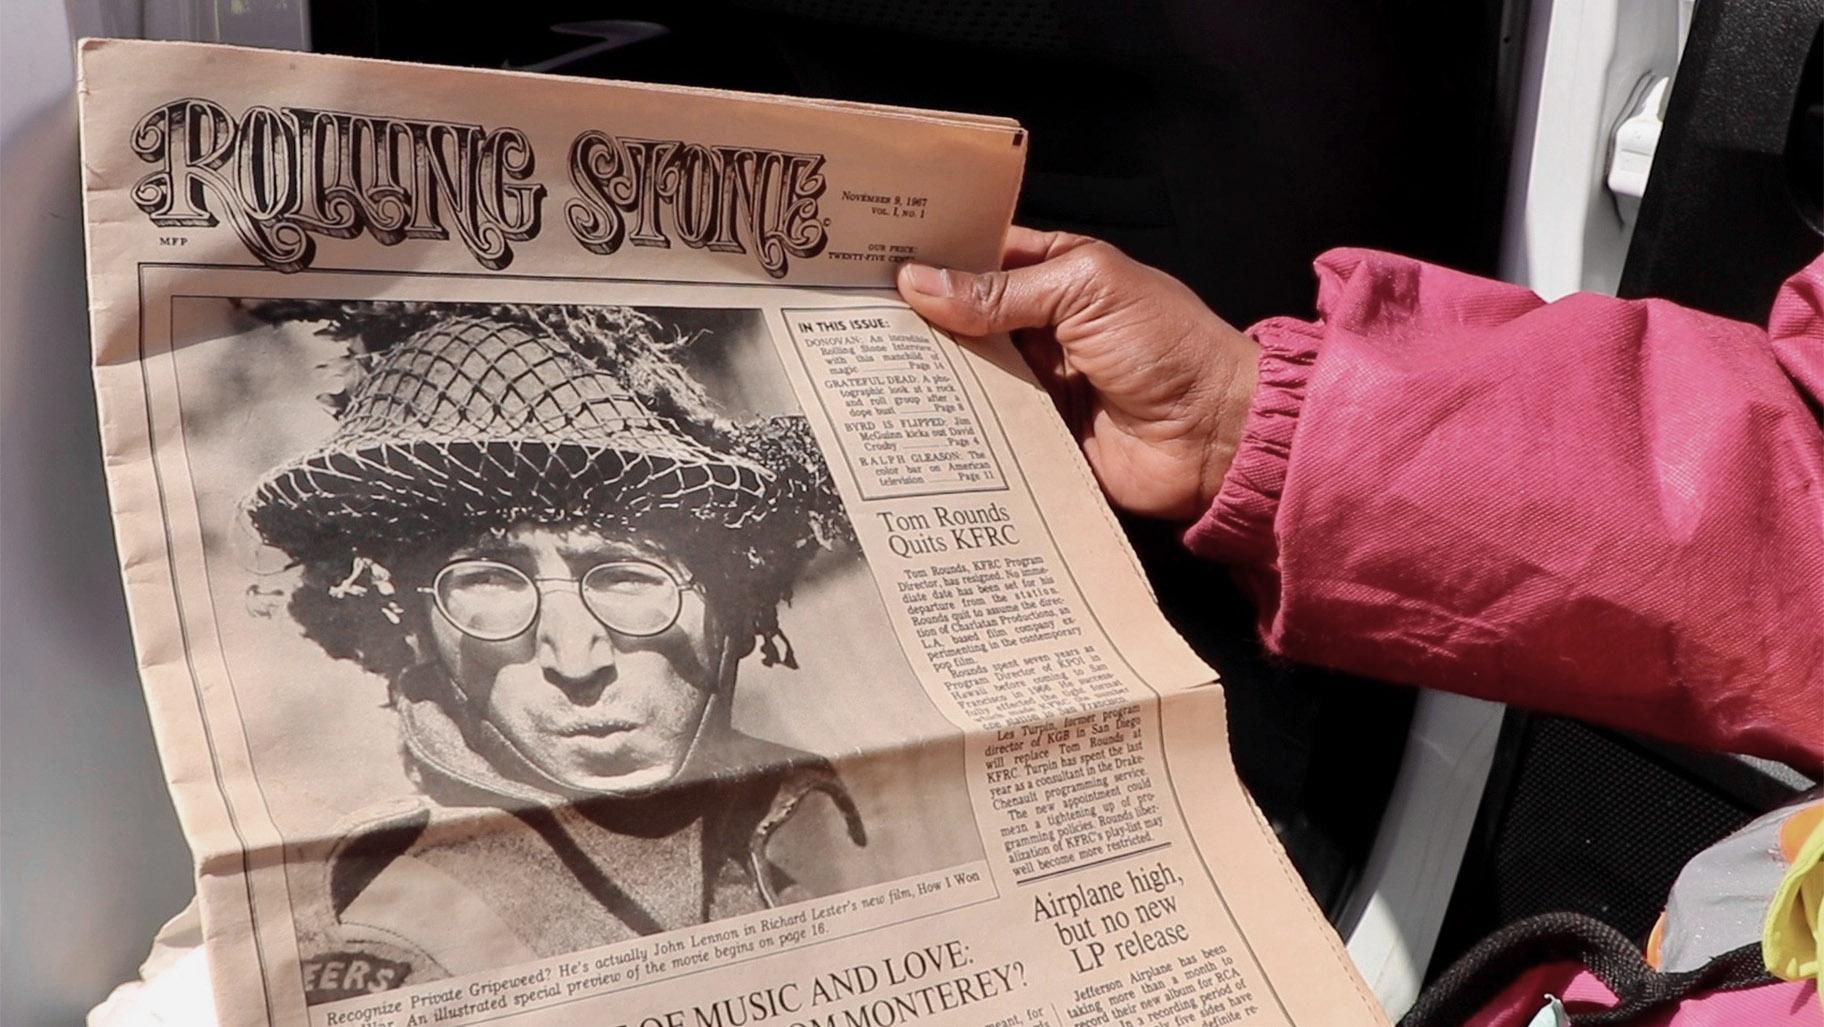 Angel Williams holds what appears to be the first issue of the iconic music magazine Rolling Stone, published in Nov. 1967 and featuring John Lennon on the cover, on April 1, 2022. Williams found the magazine while dumpster diving about a year ago. (Evan Garcia / WTTW News)